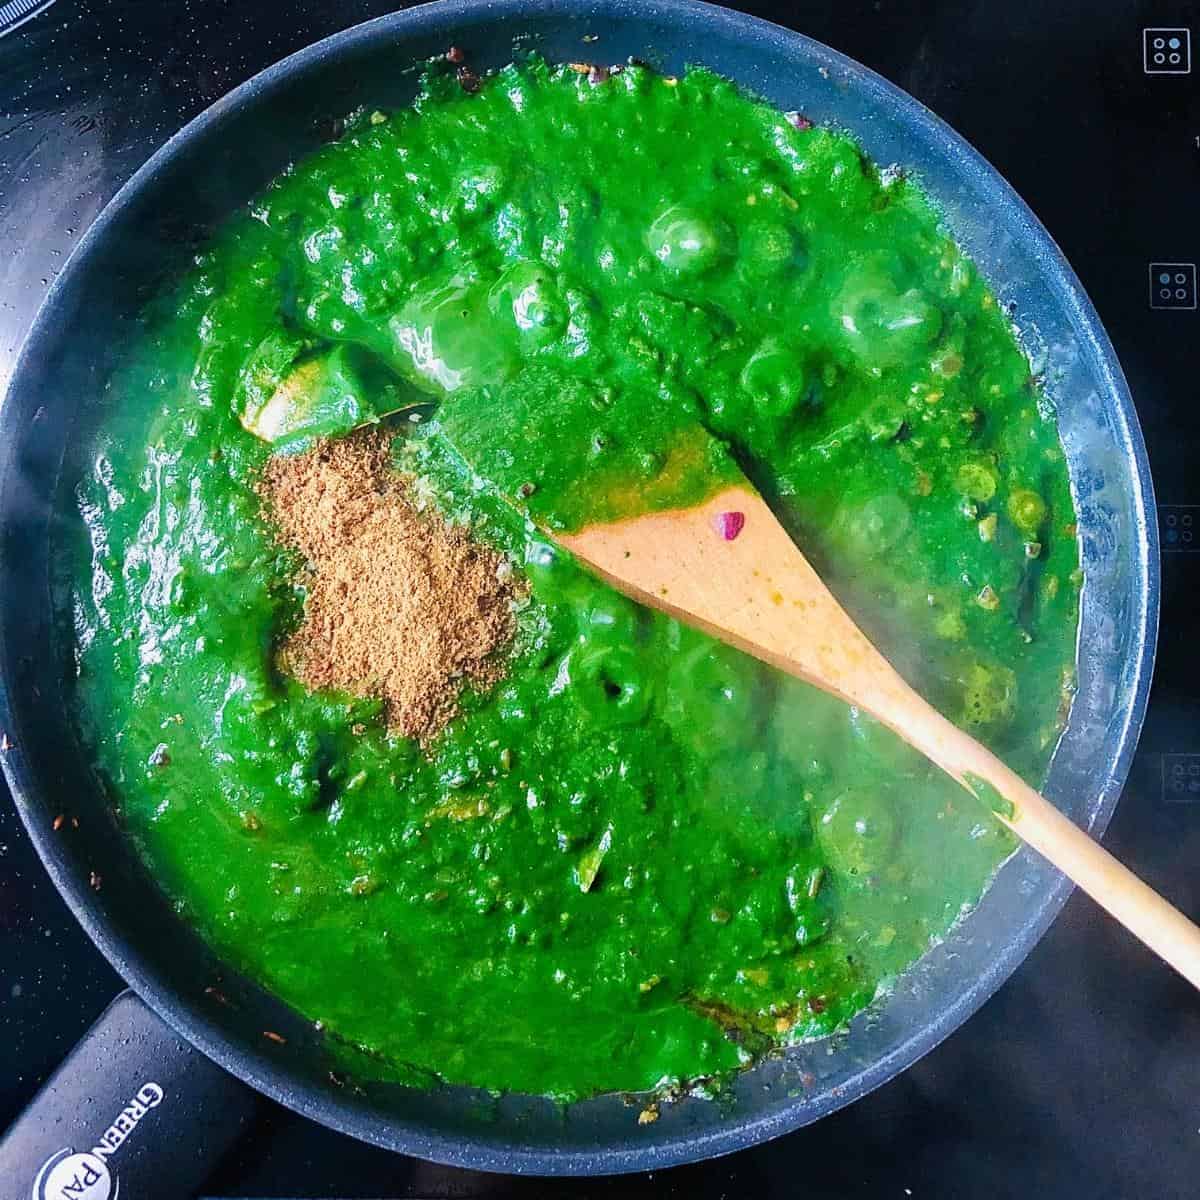 Spinach puree mixed into palak paneer base mix and gram masala added in a frying pan